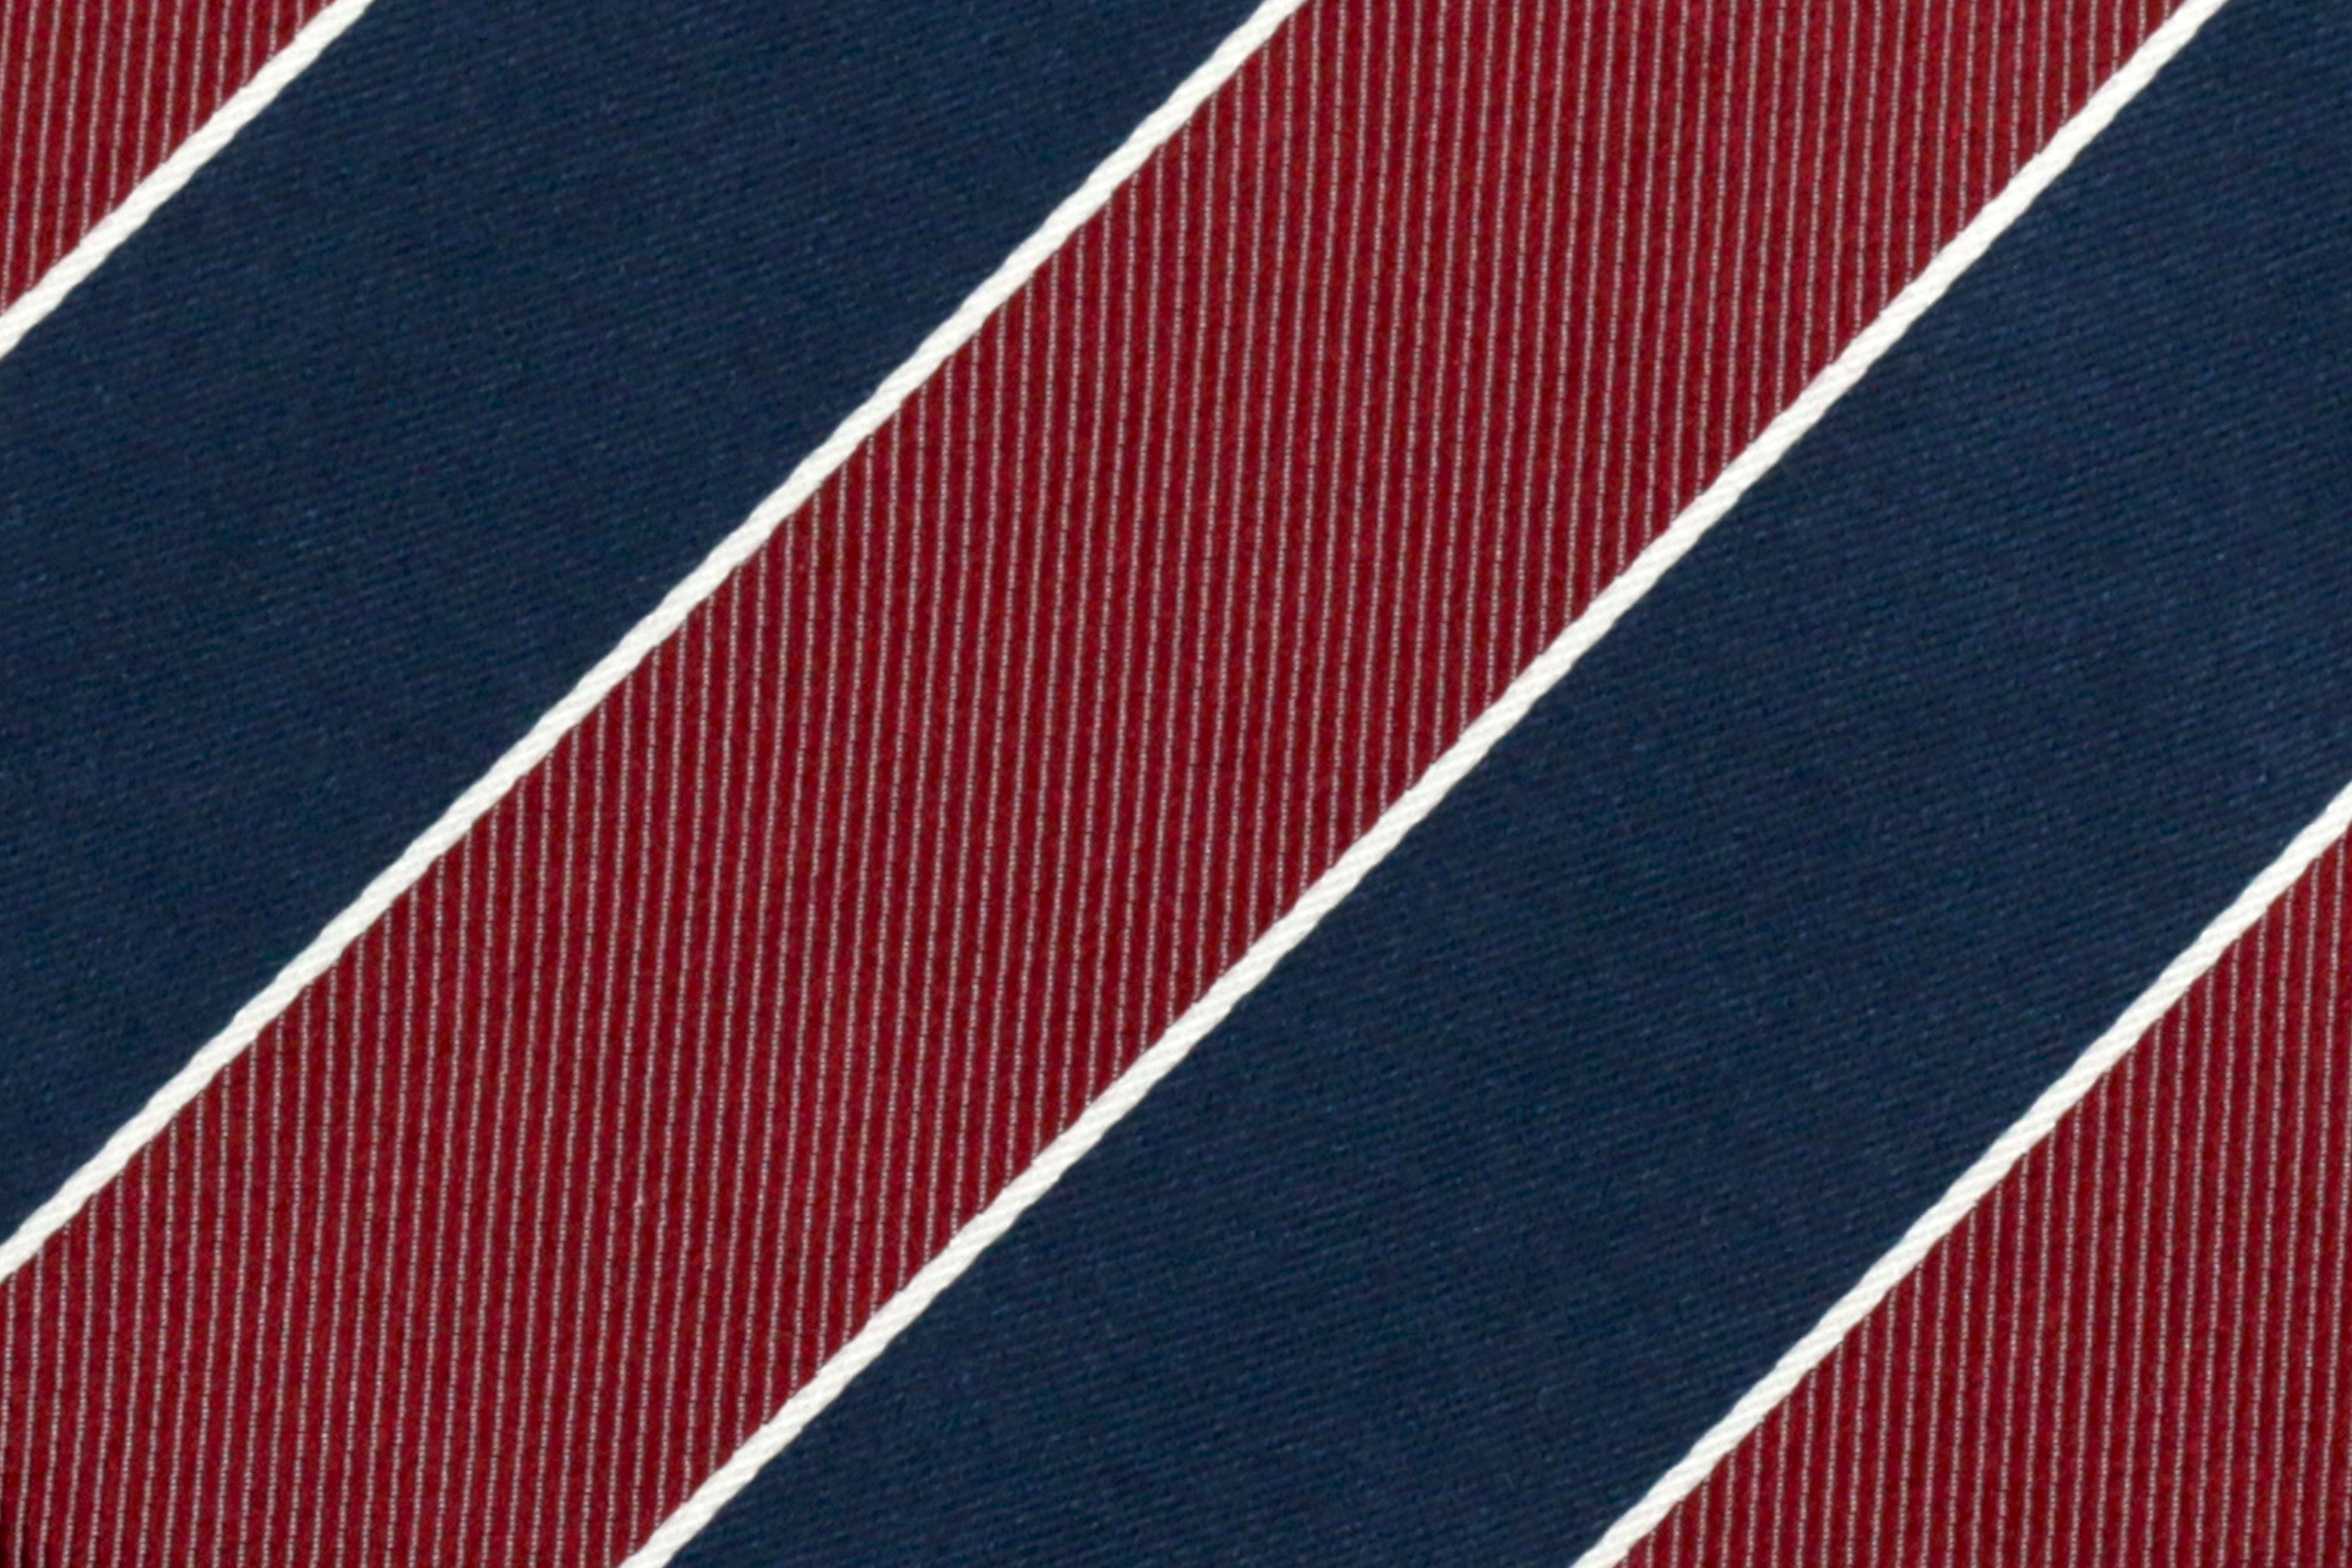 100% Silk Extra Long Tie with Shiny Wide Stripes for Big and Tall Men